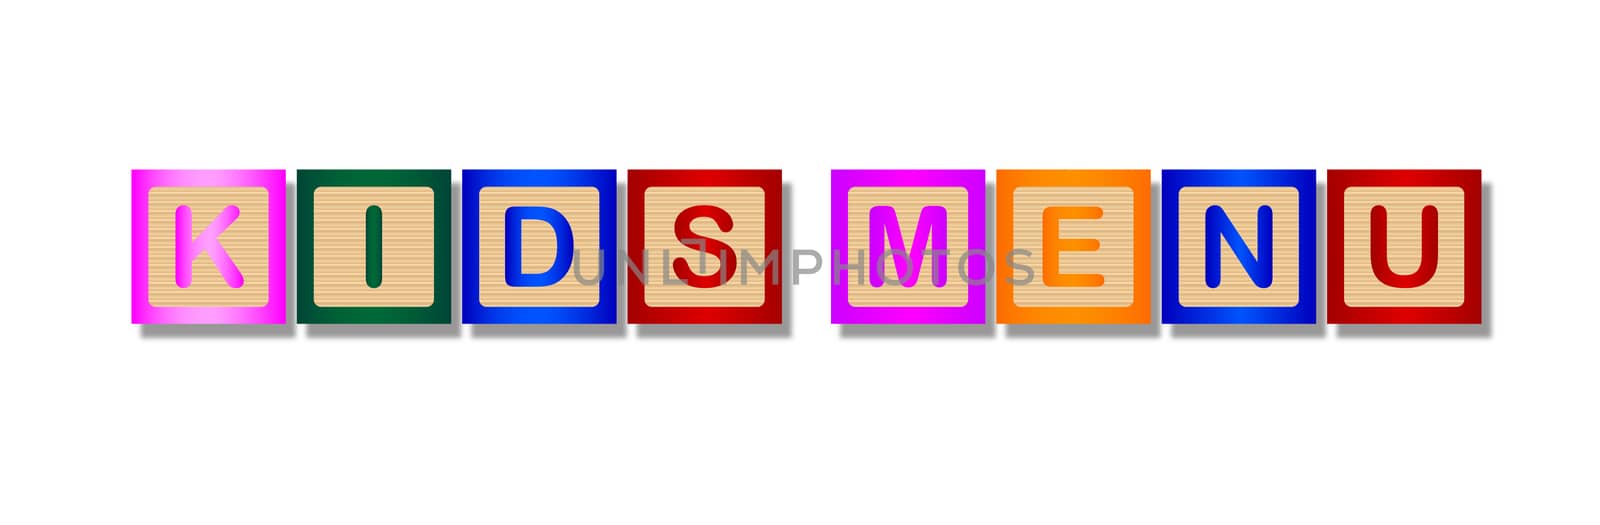 A collection of wooden block letters spelling Kids Menu over a white background